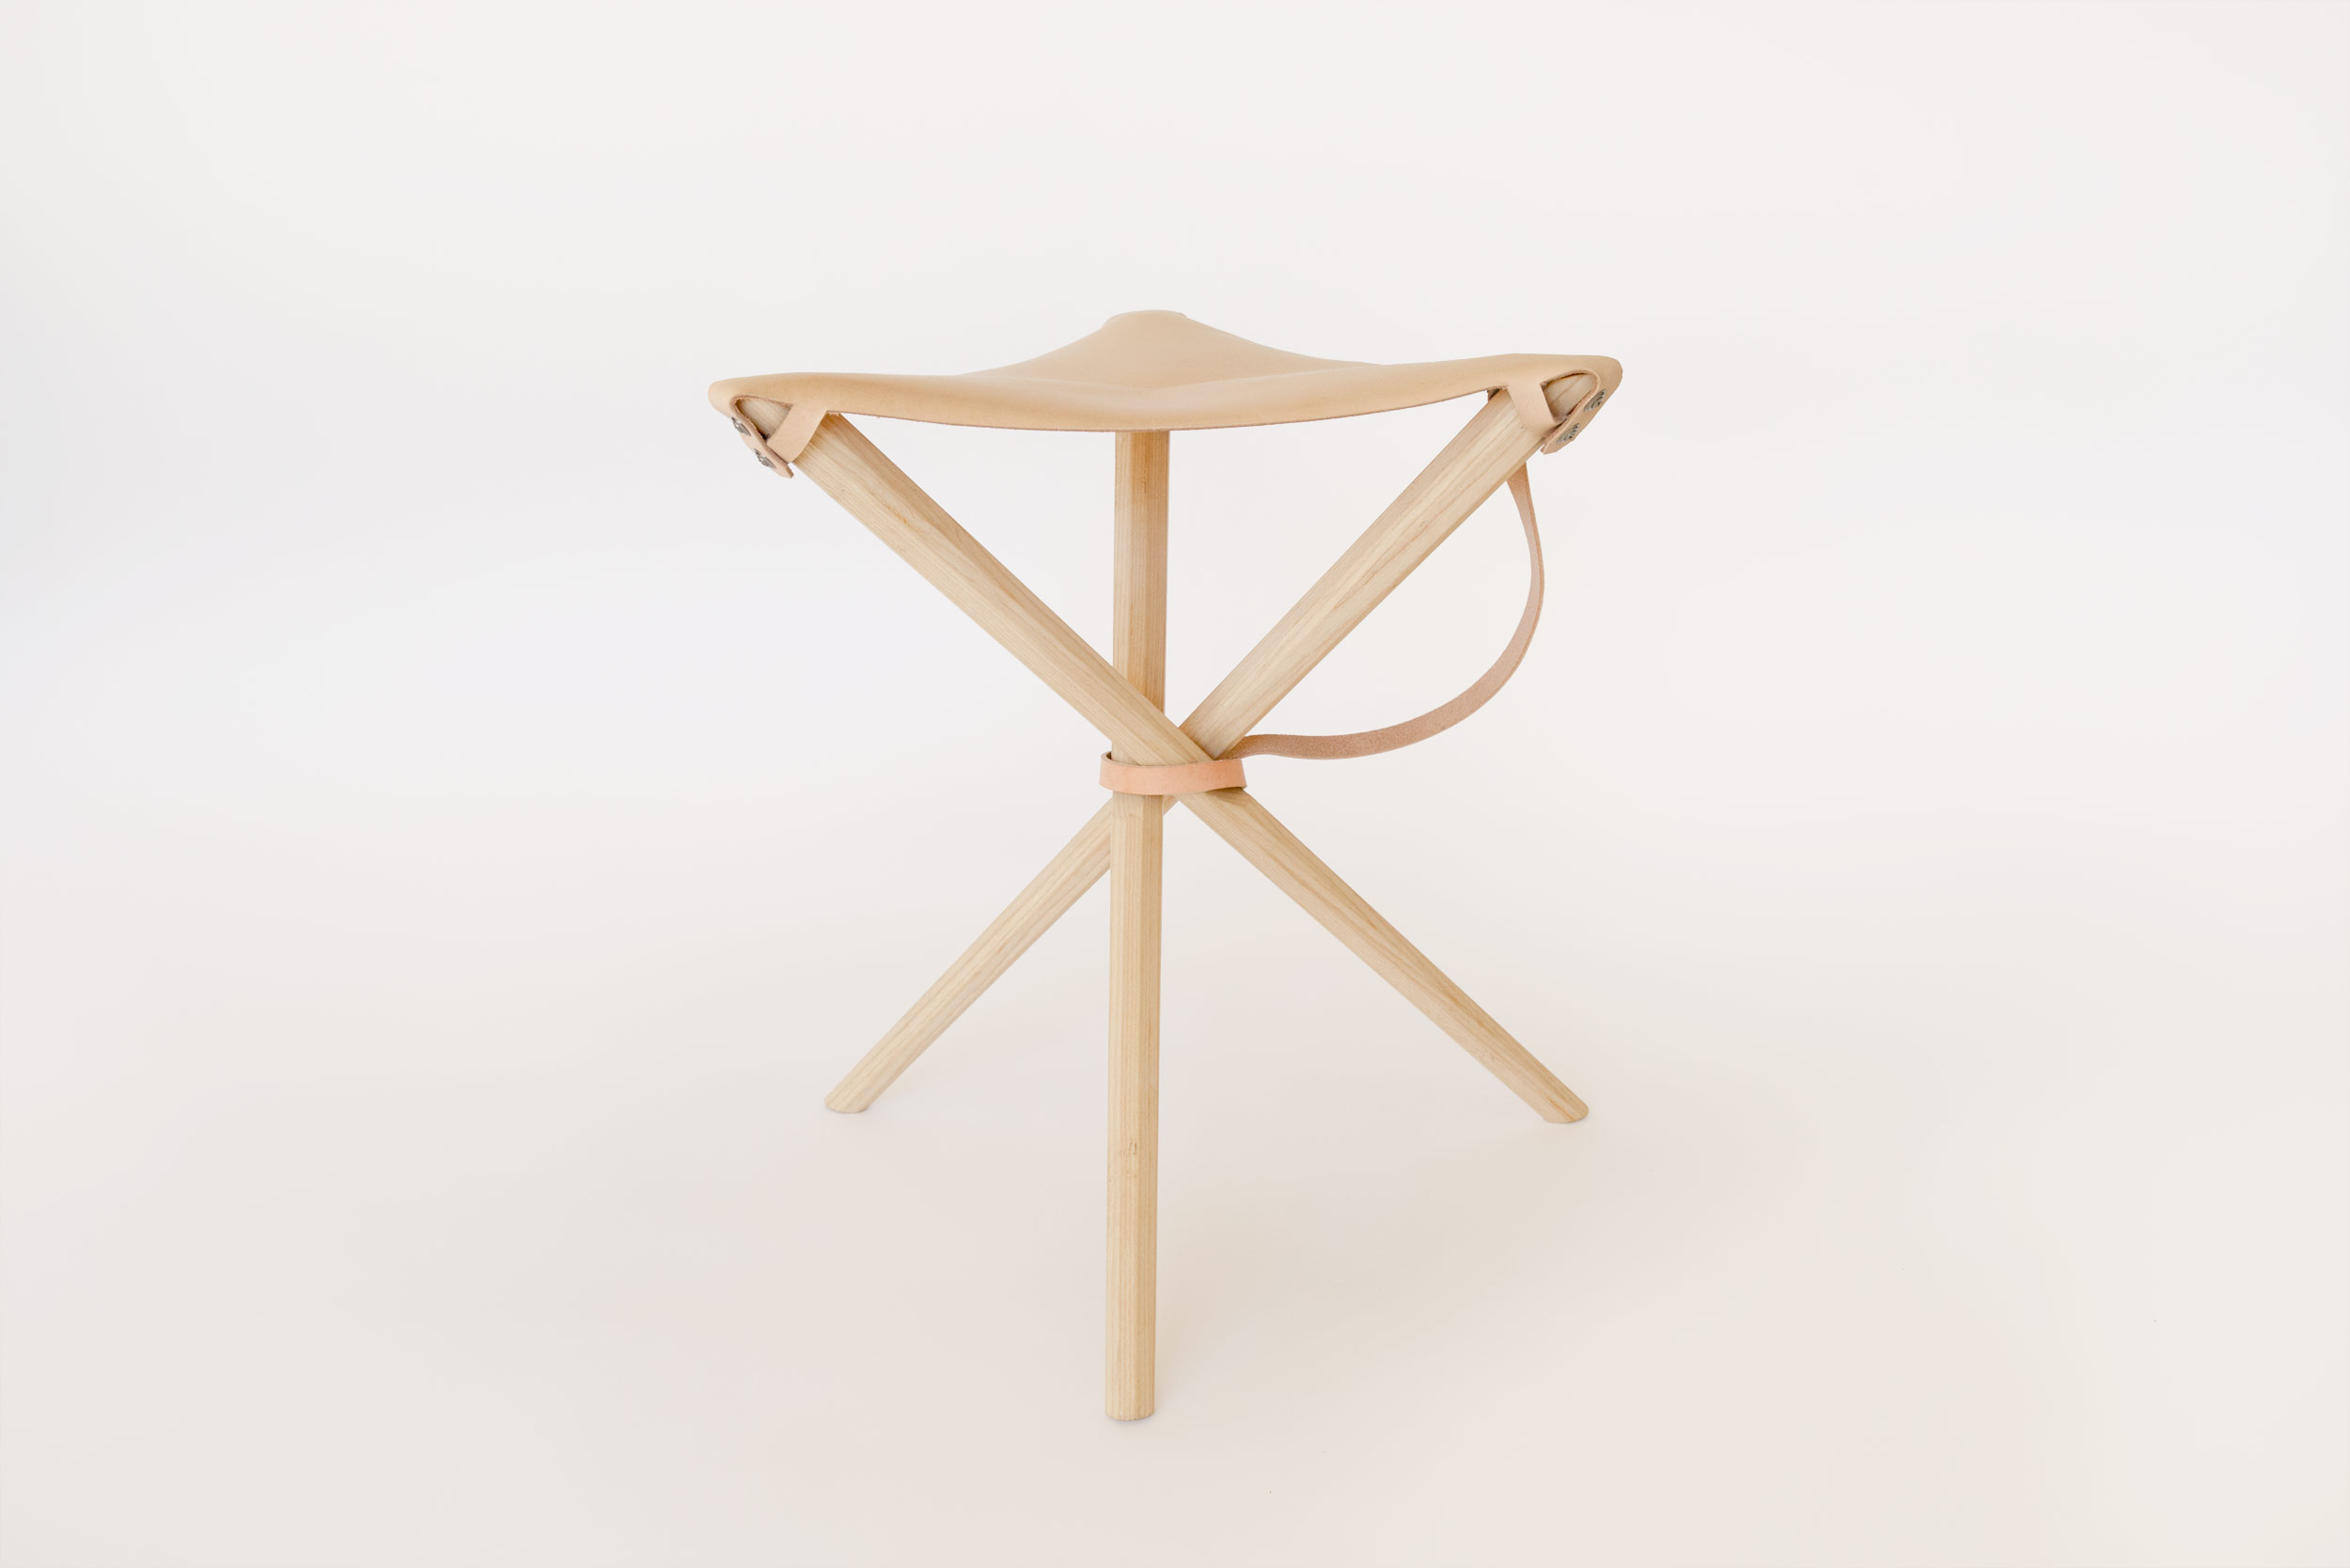 Coyote Stool in Veg Tan with Leash